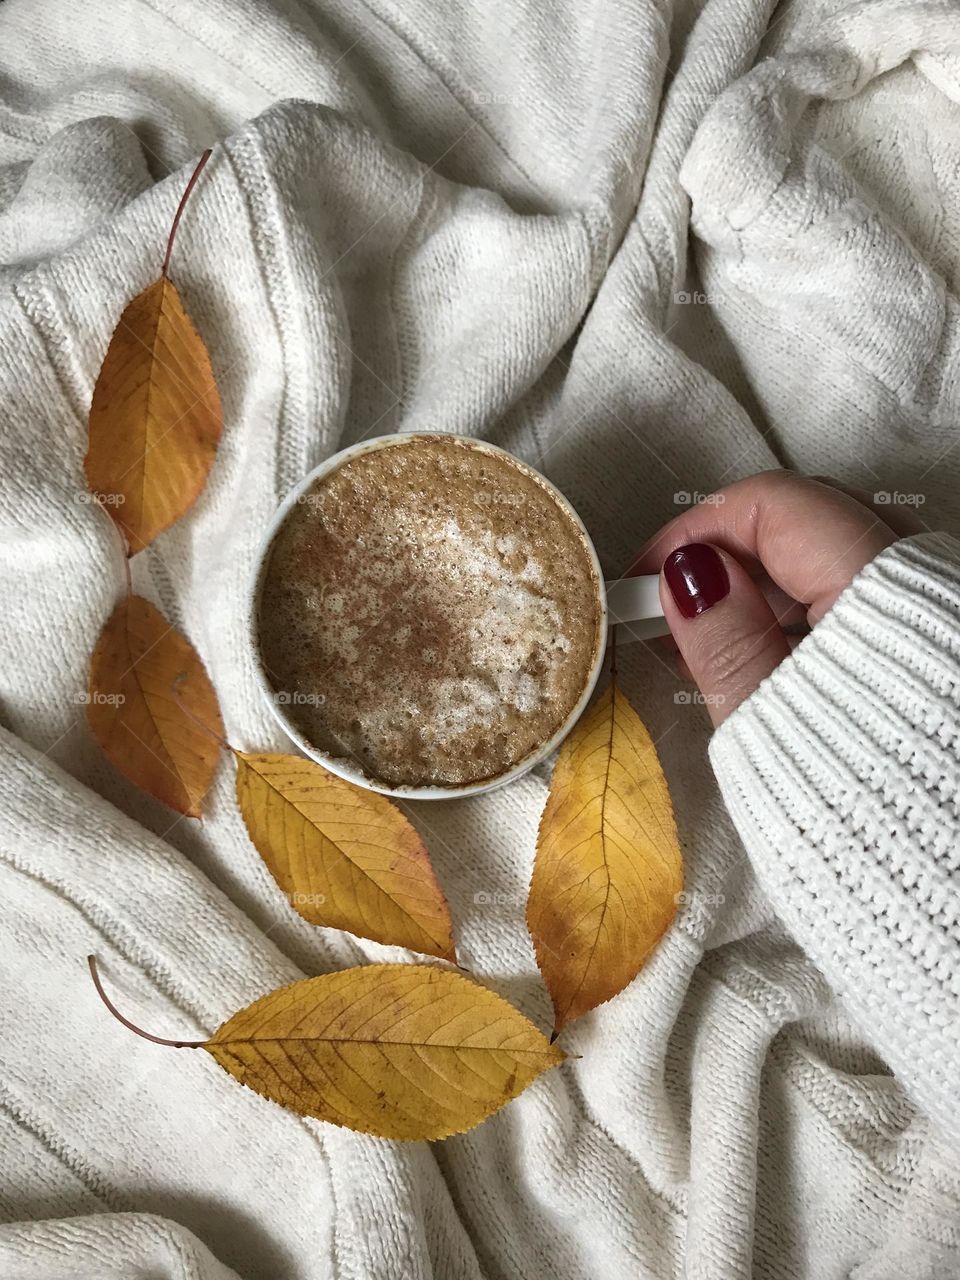 When fall is here, you gotta get yourself a hot drink and a cozy sweater.